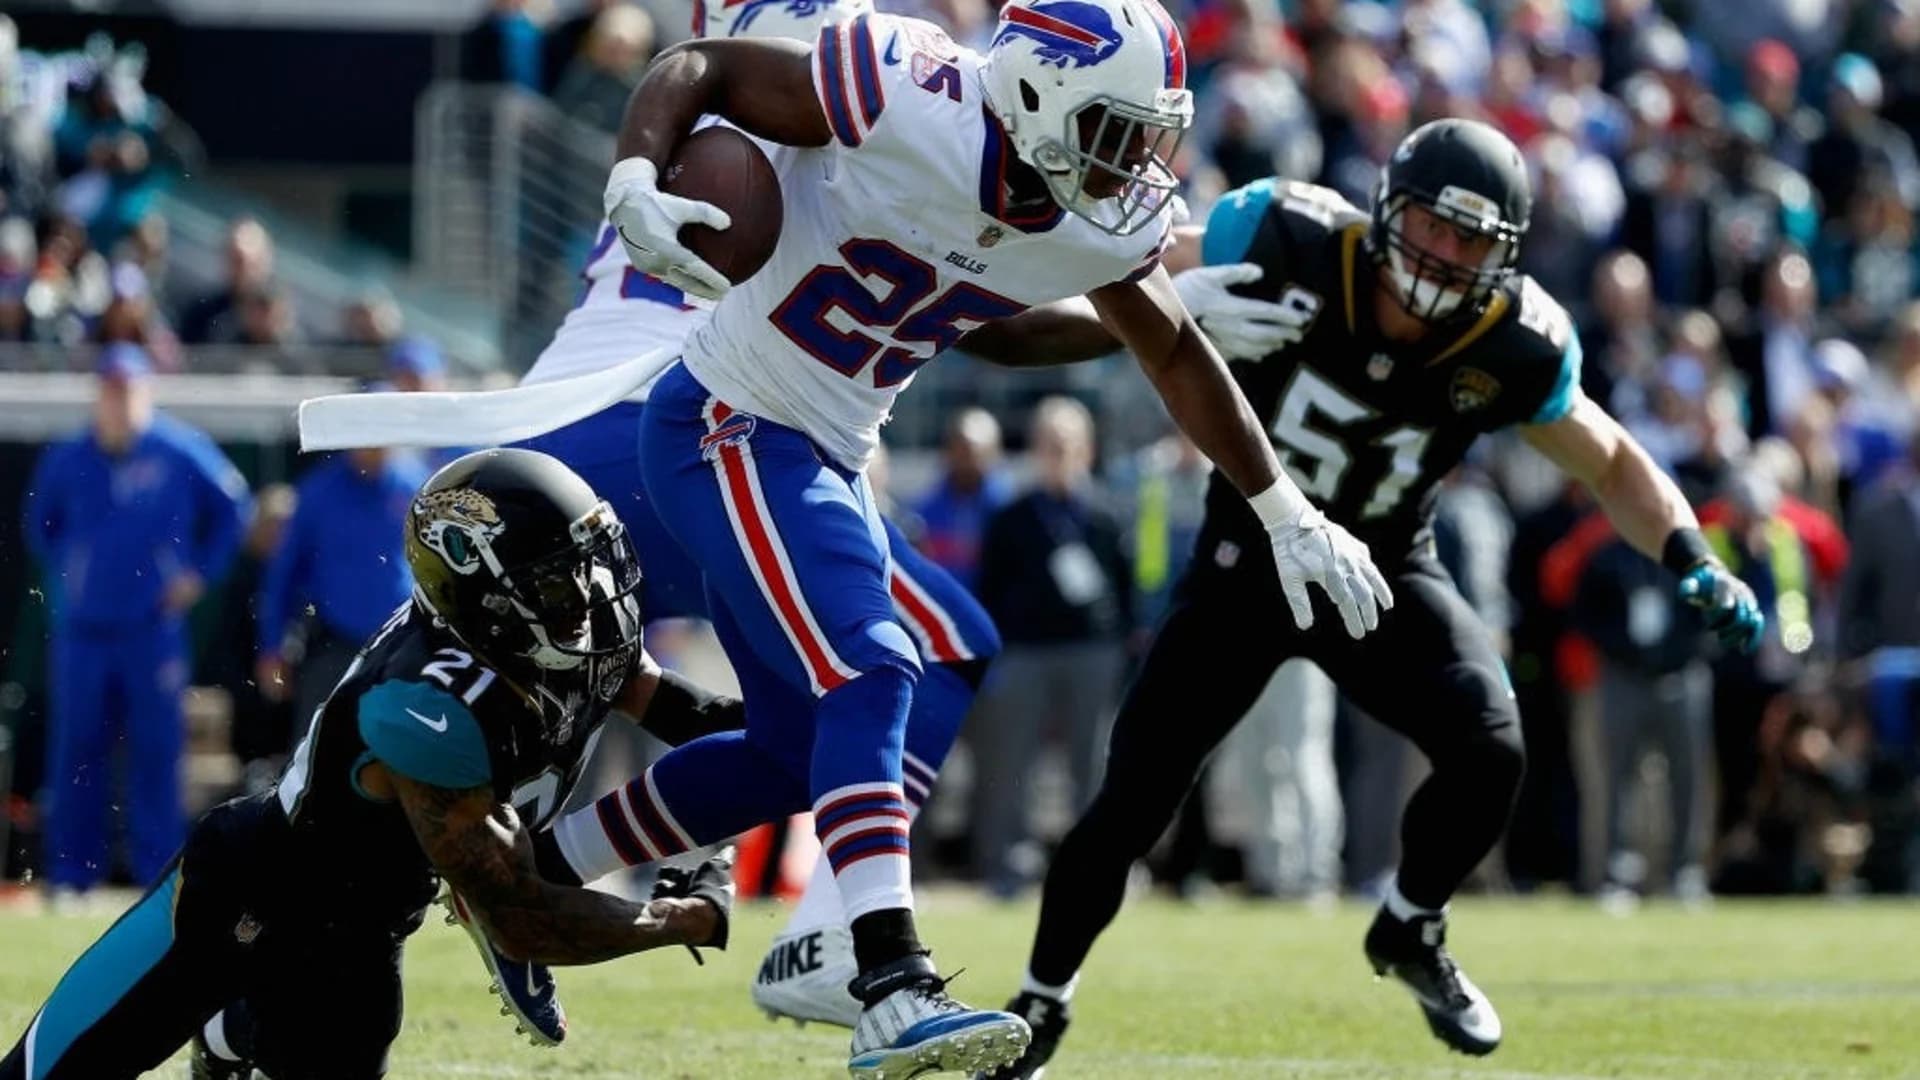 Police: Woman assaulted at home of NFL star LeSean McCoy